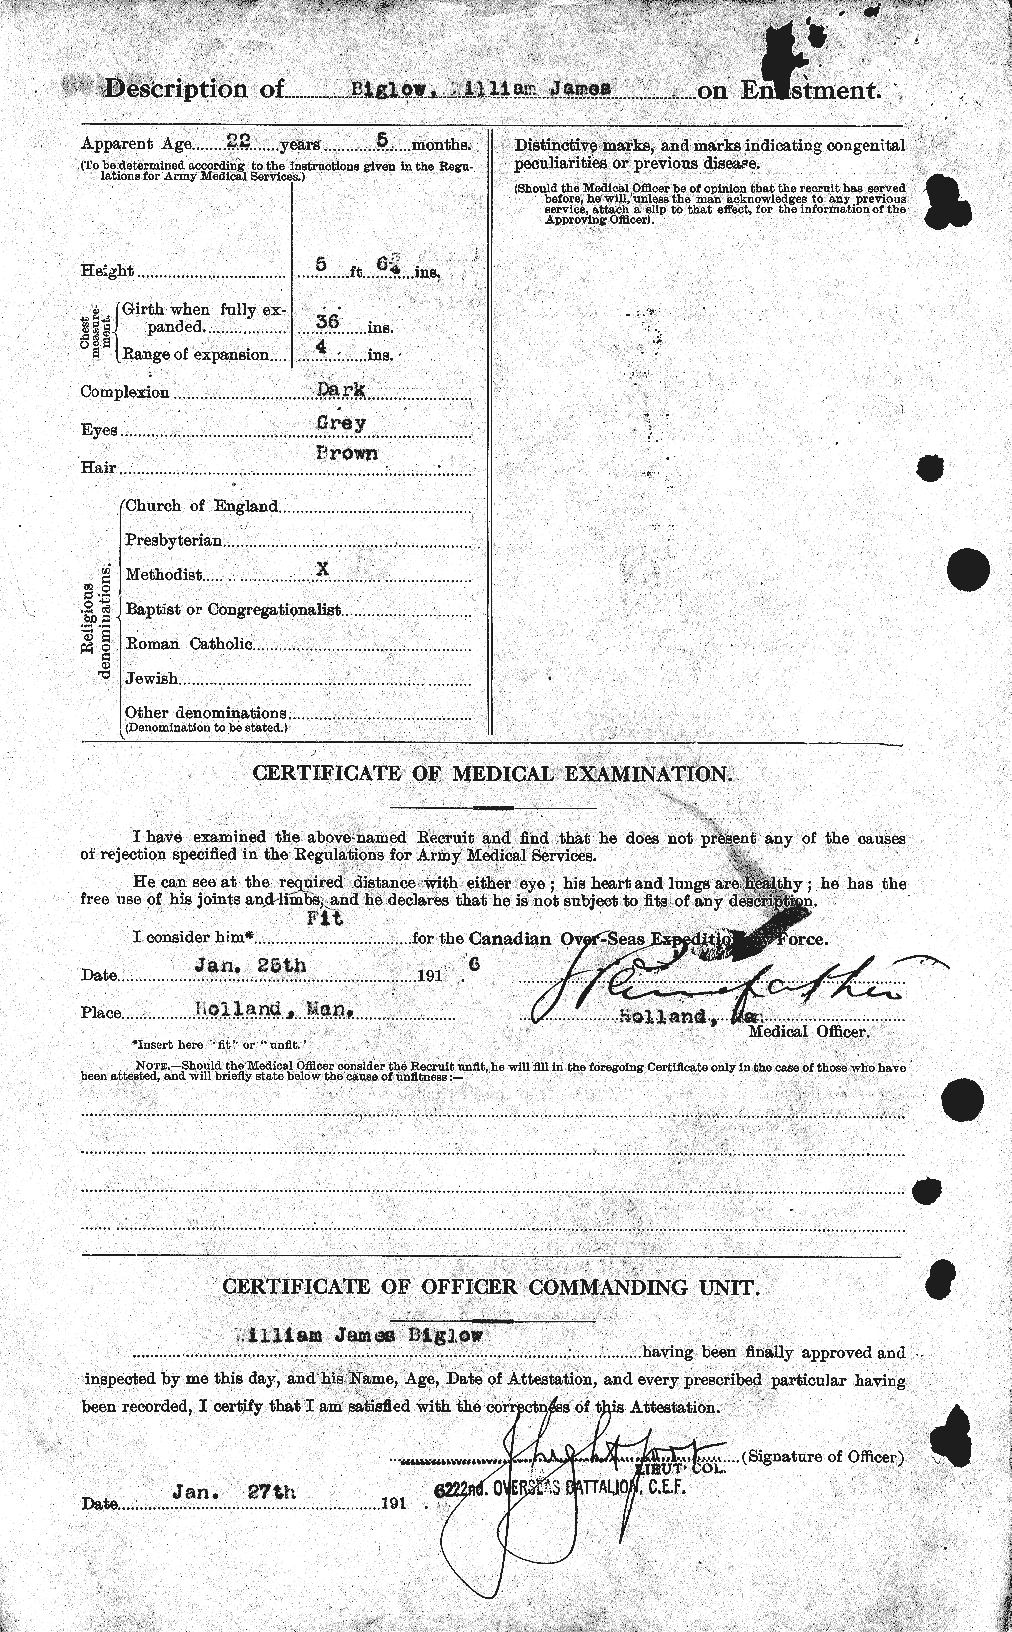 Personnel Records of the First World War - CEF 239111b